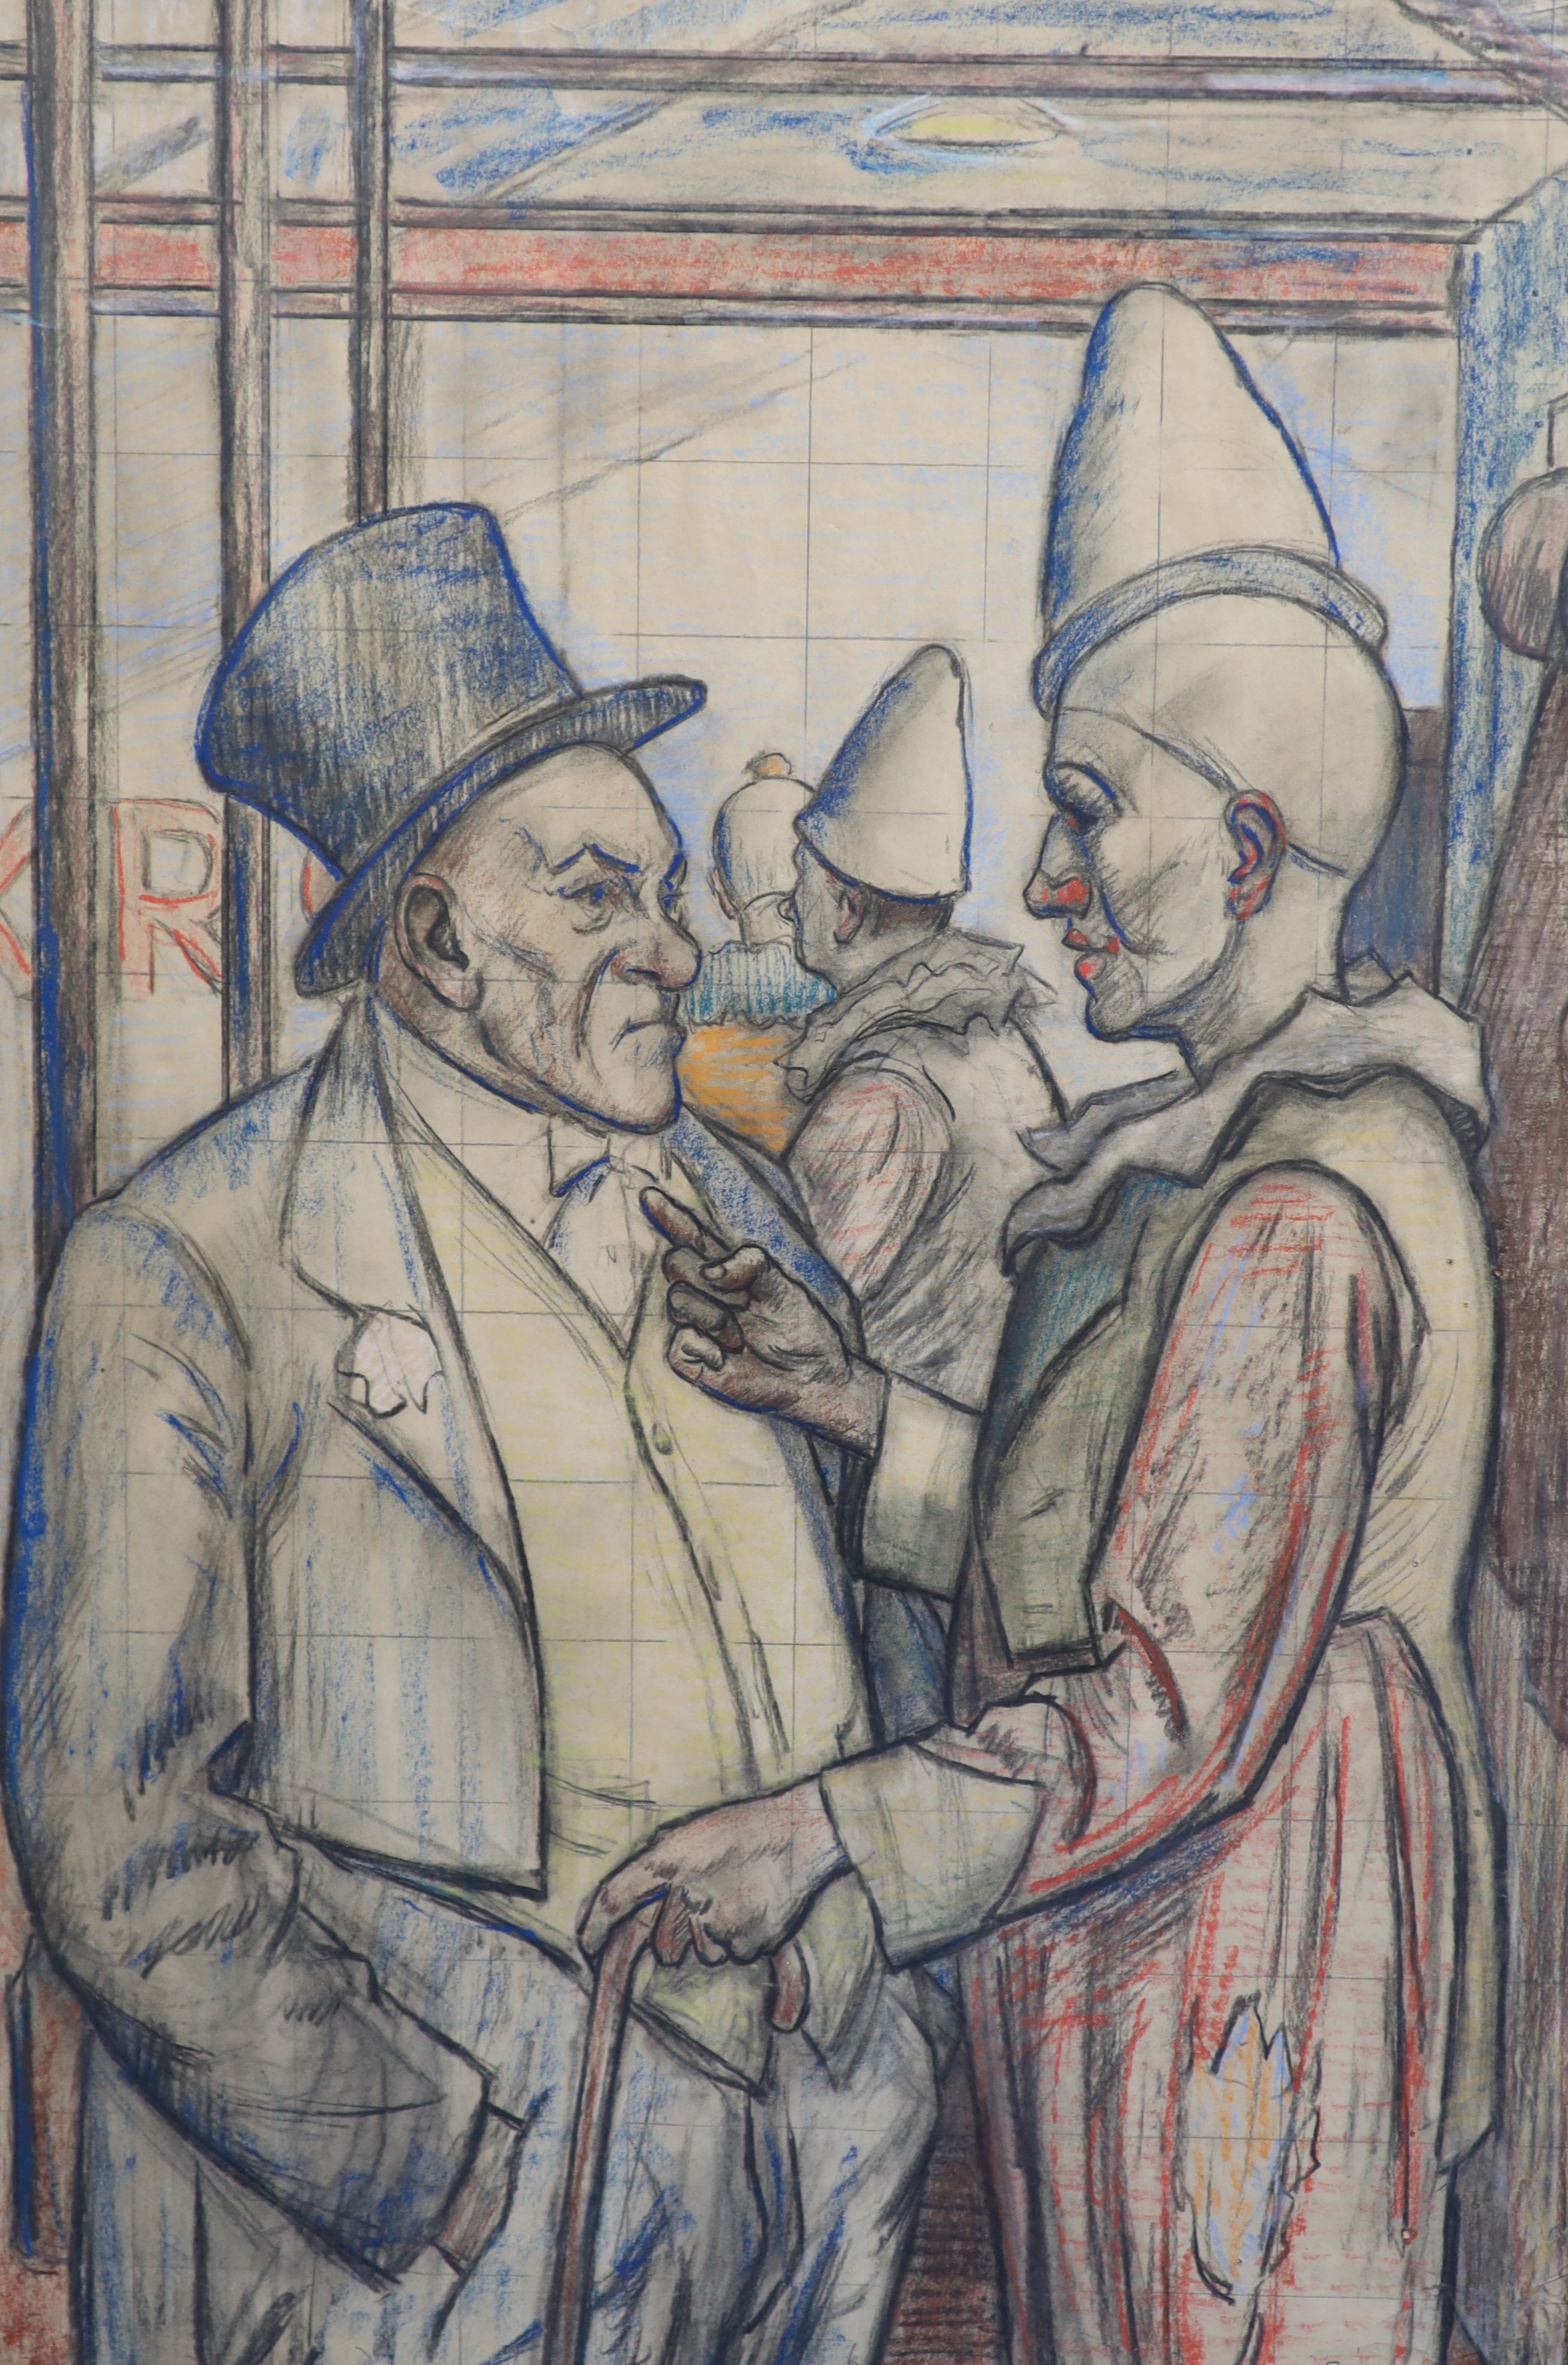 Clifford Hall (1904-1973), Ringmaster and Clown, Pastel on paper, 75 x 50cm.